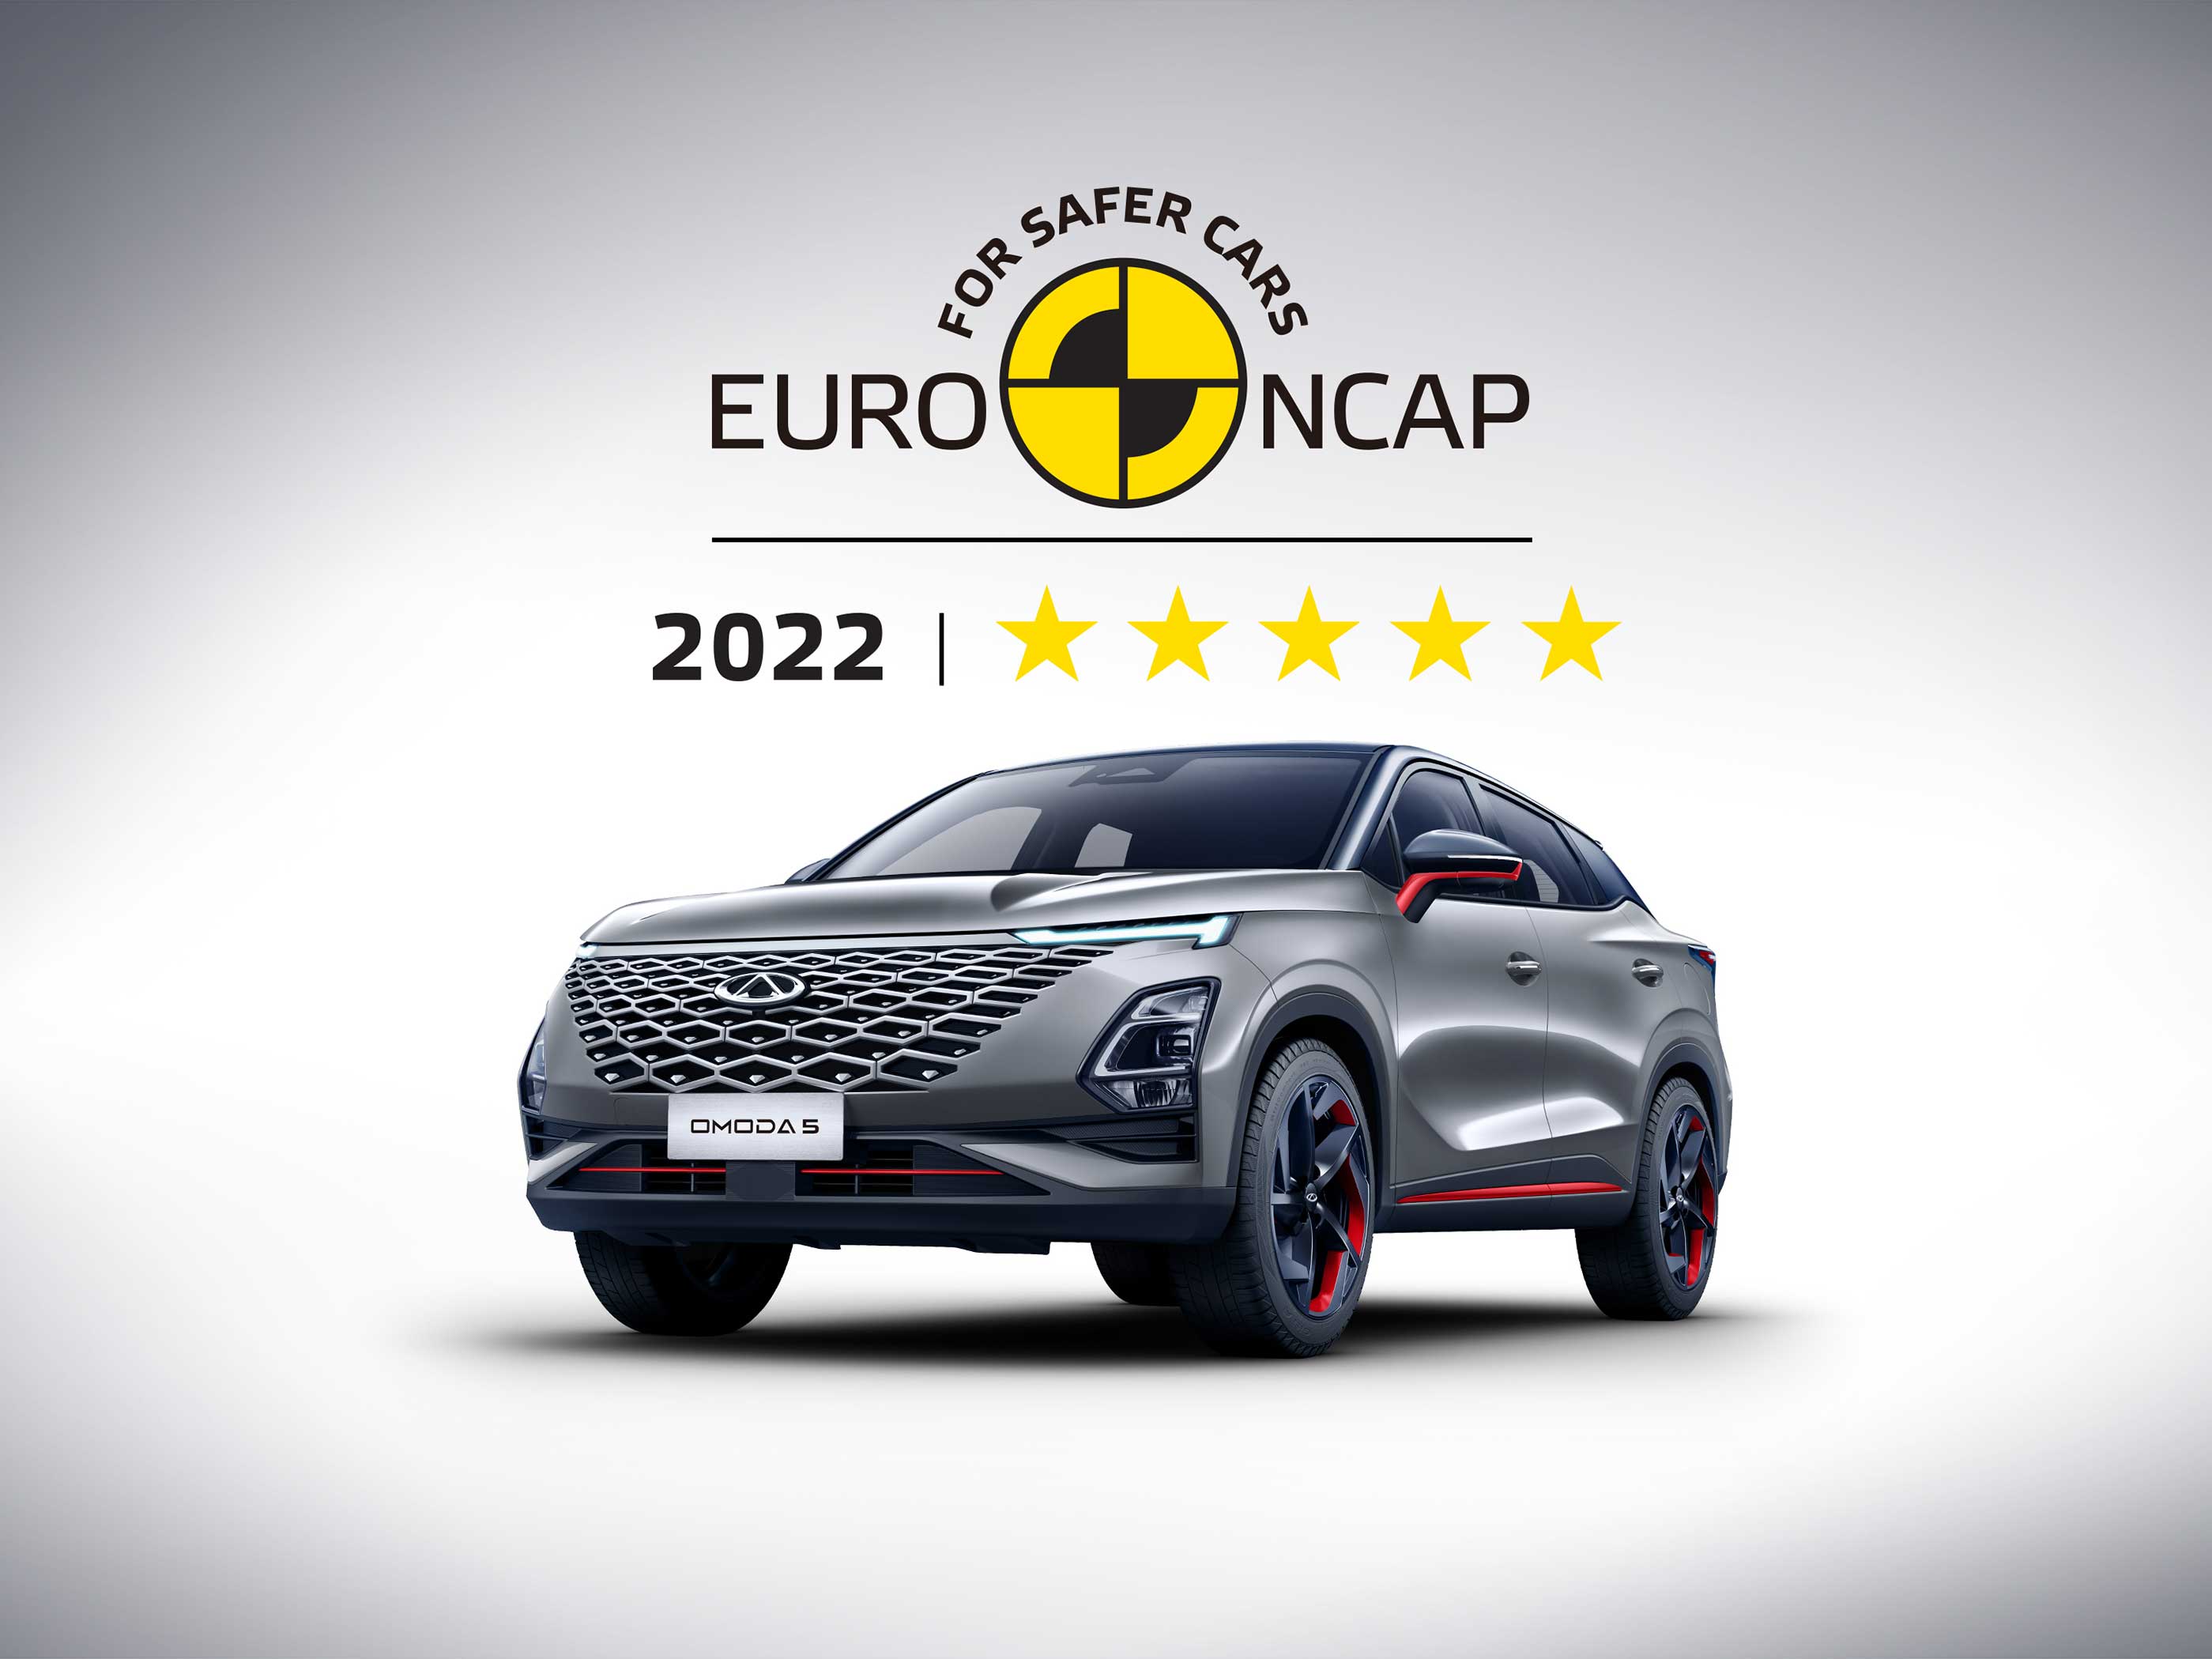 OMODA 5 rated Five-stars by Euro NCAP, Highlighting its Excellent Safety Quality